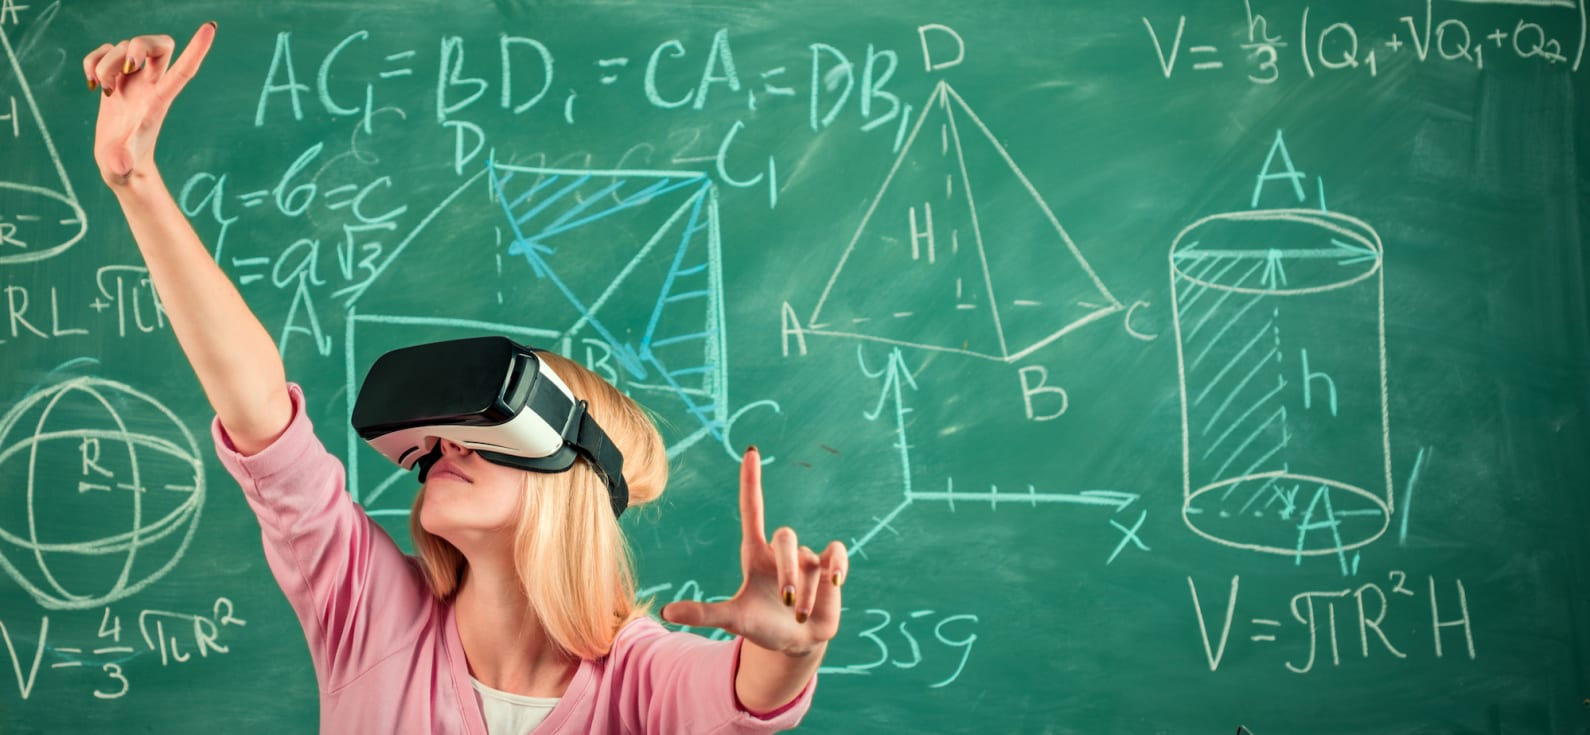 Student in a VR headset with a chalk board behind